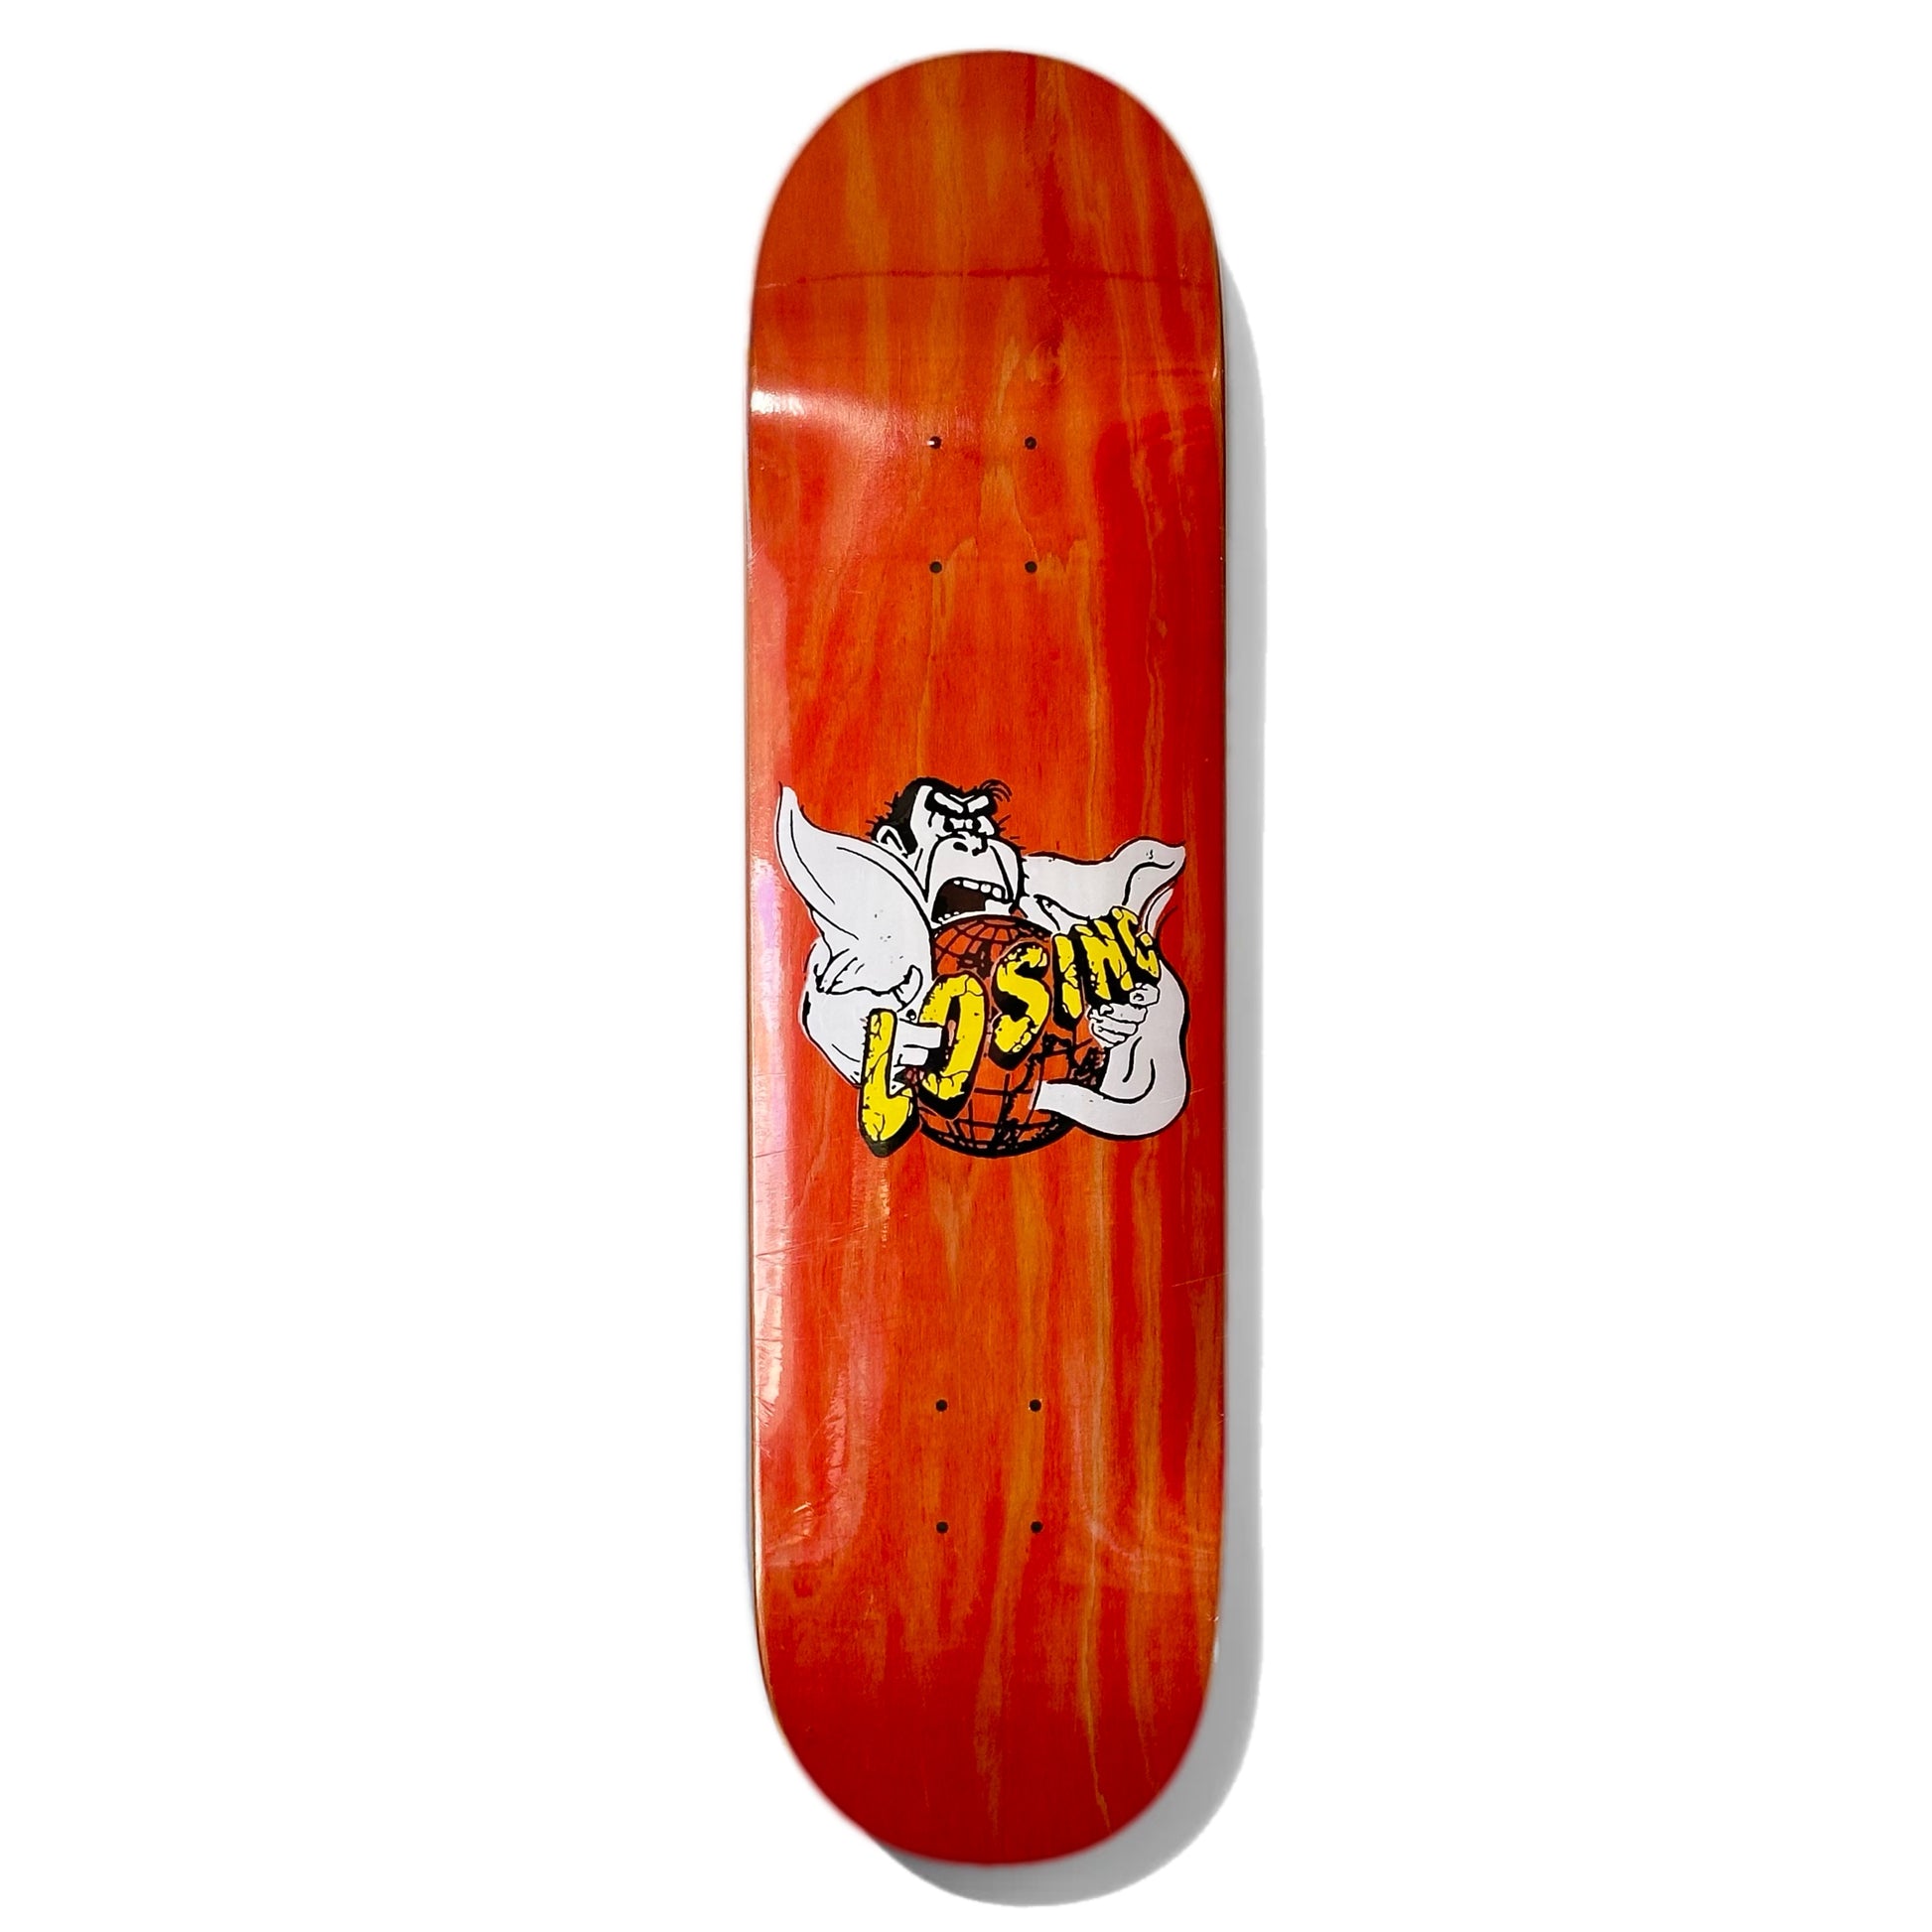 Losing Gorilla Skateboard Deck; Red background; Illustrated multicolored (black, yellow, white) graphic features gorilla type creature holding a globe with yellow lettering that spells out “Losing” across the front of the graphic 